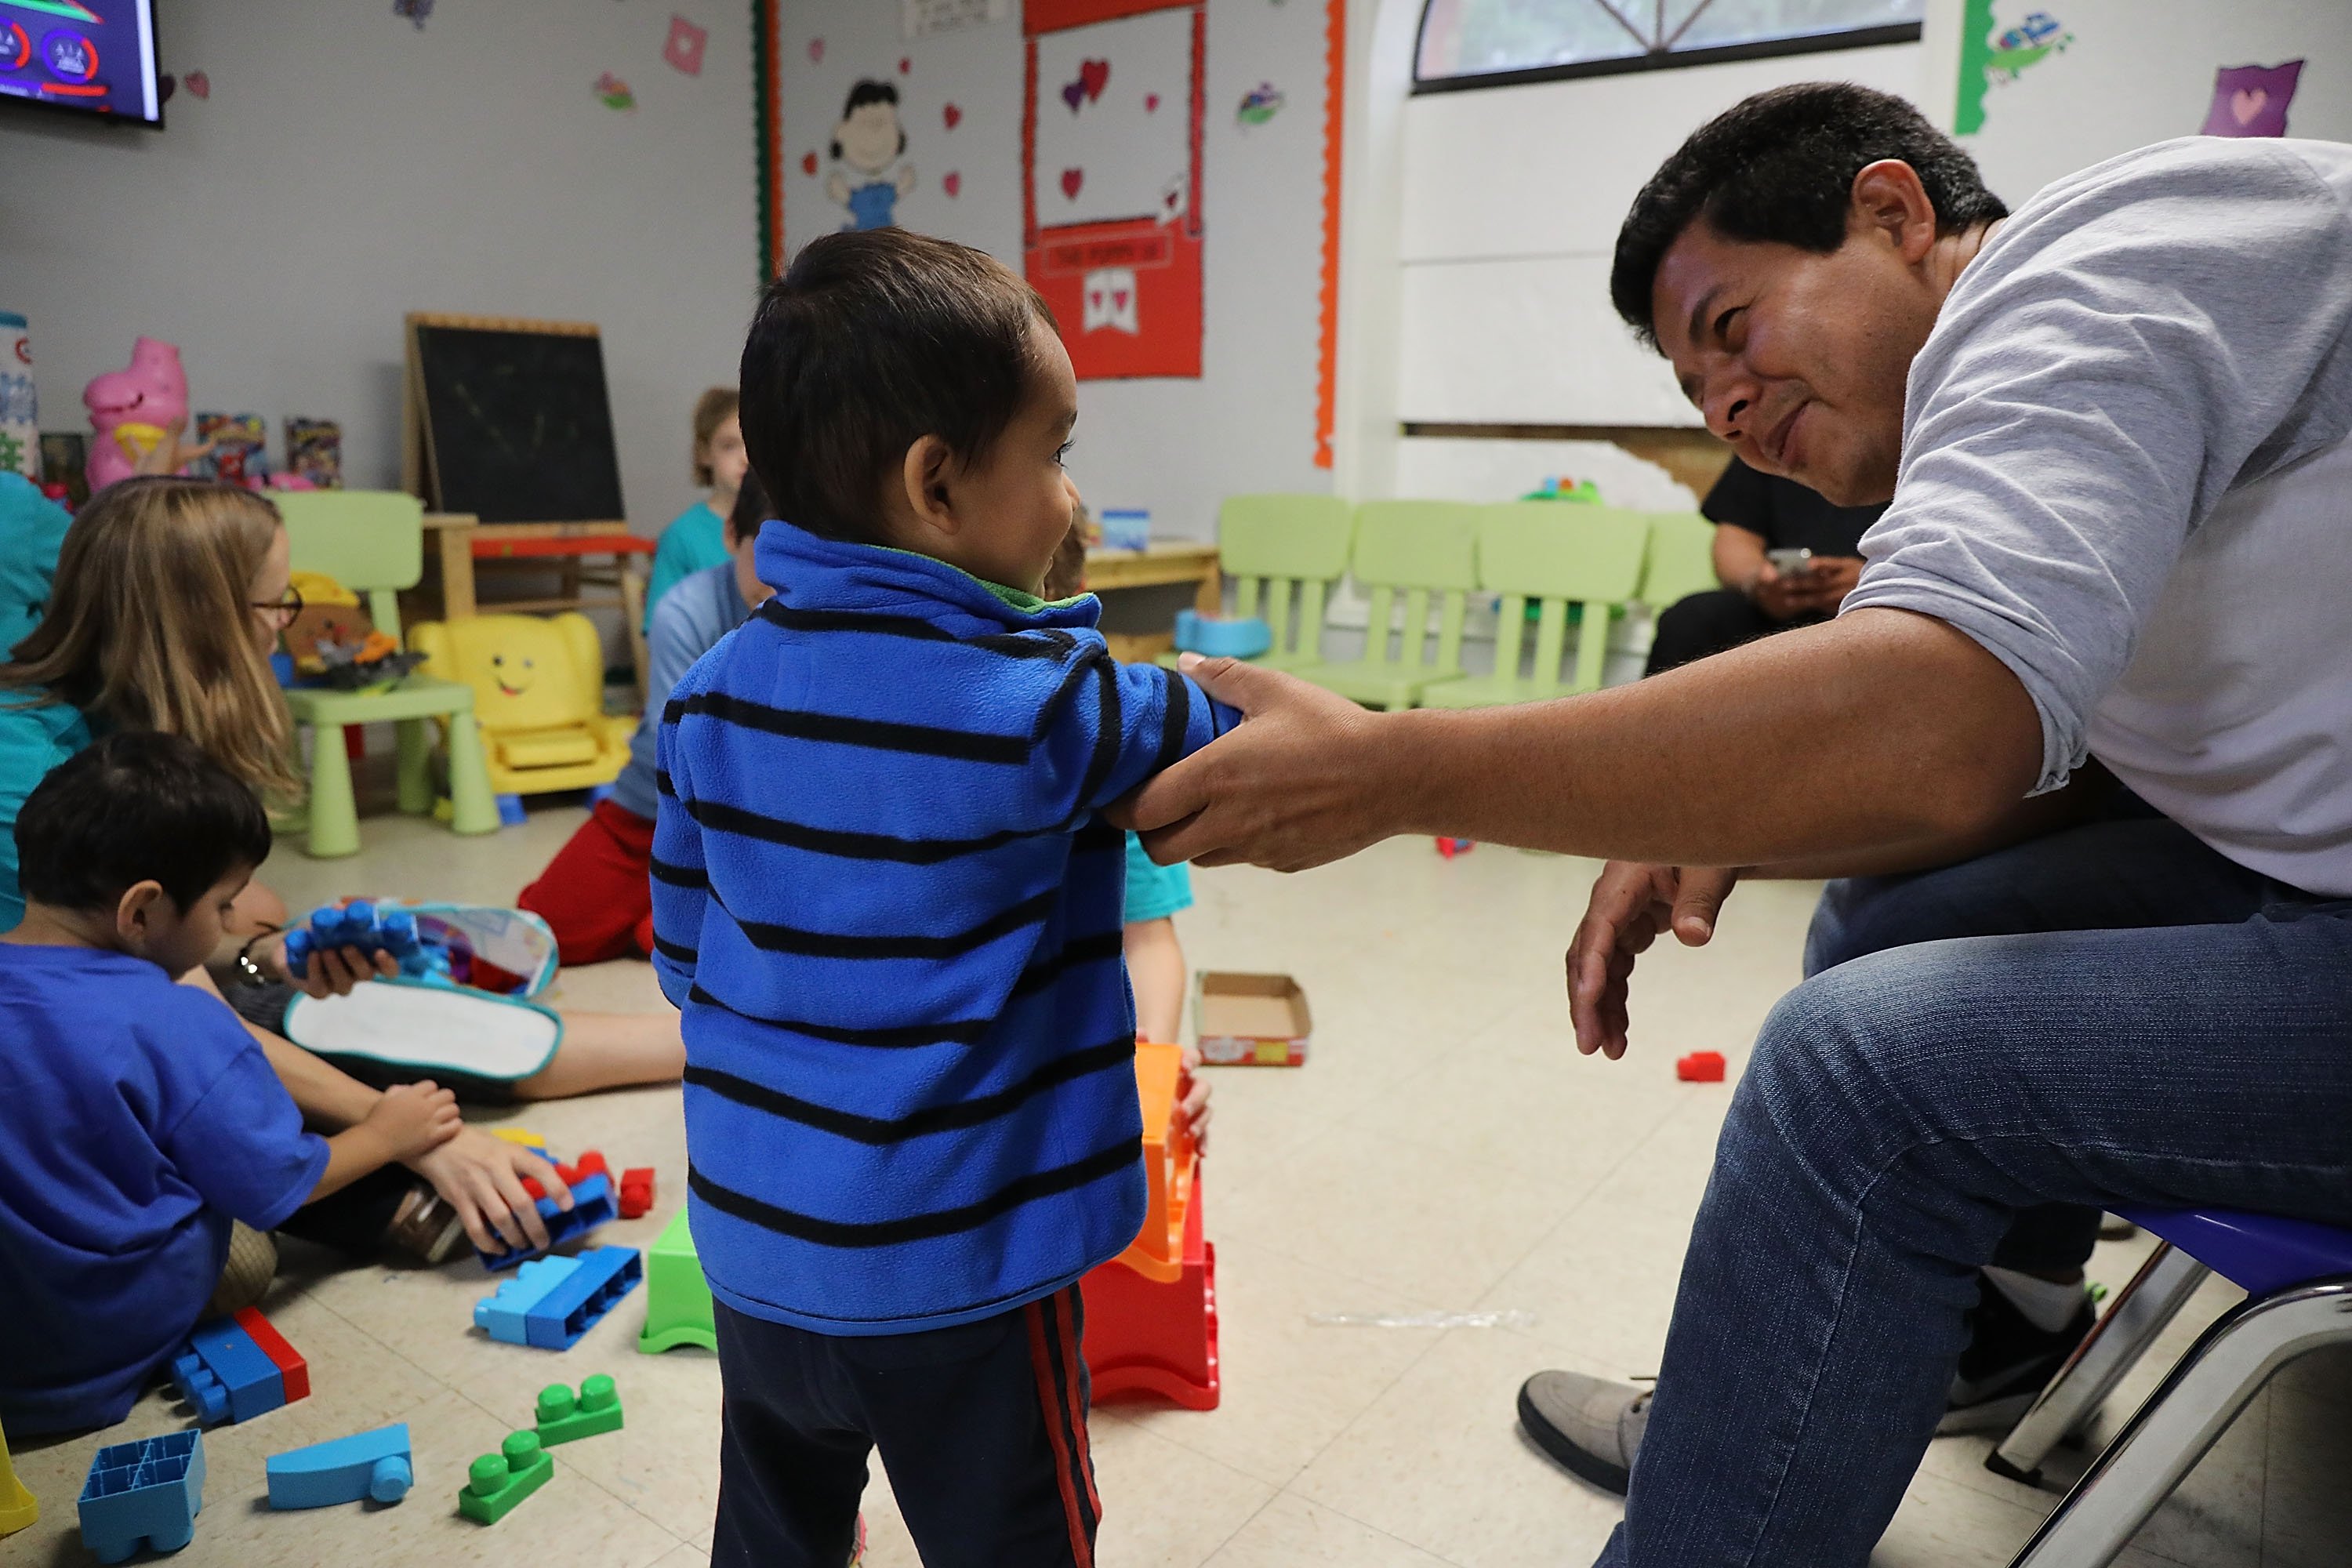 MCALLEN, TX - JUNE 21: Recently arrived migrant families rest at the Catholic Charities Humanitarian Respite Center on June 21, 2018 in McAllen, Texas. Once families and individuals are released from Customs and Border Protection to continue their legal process, they are brought to the center to rest, clean up, enjoy a meal and get guidance to their next destination. Before Trump signed an executive order yesterday that the administration says halts the practice of separating families seeking asylum, more than 2,300 immigrant children had been separated from their parents in the zero-tolerance policy for border crossers. (Photo by Spencer Platt/Getty Images)